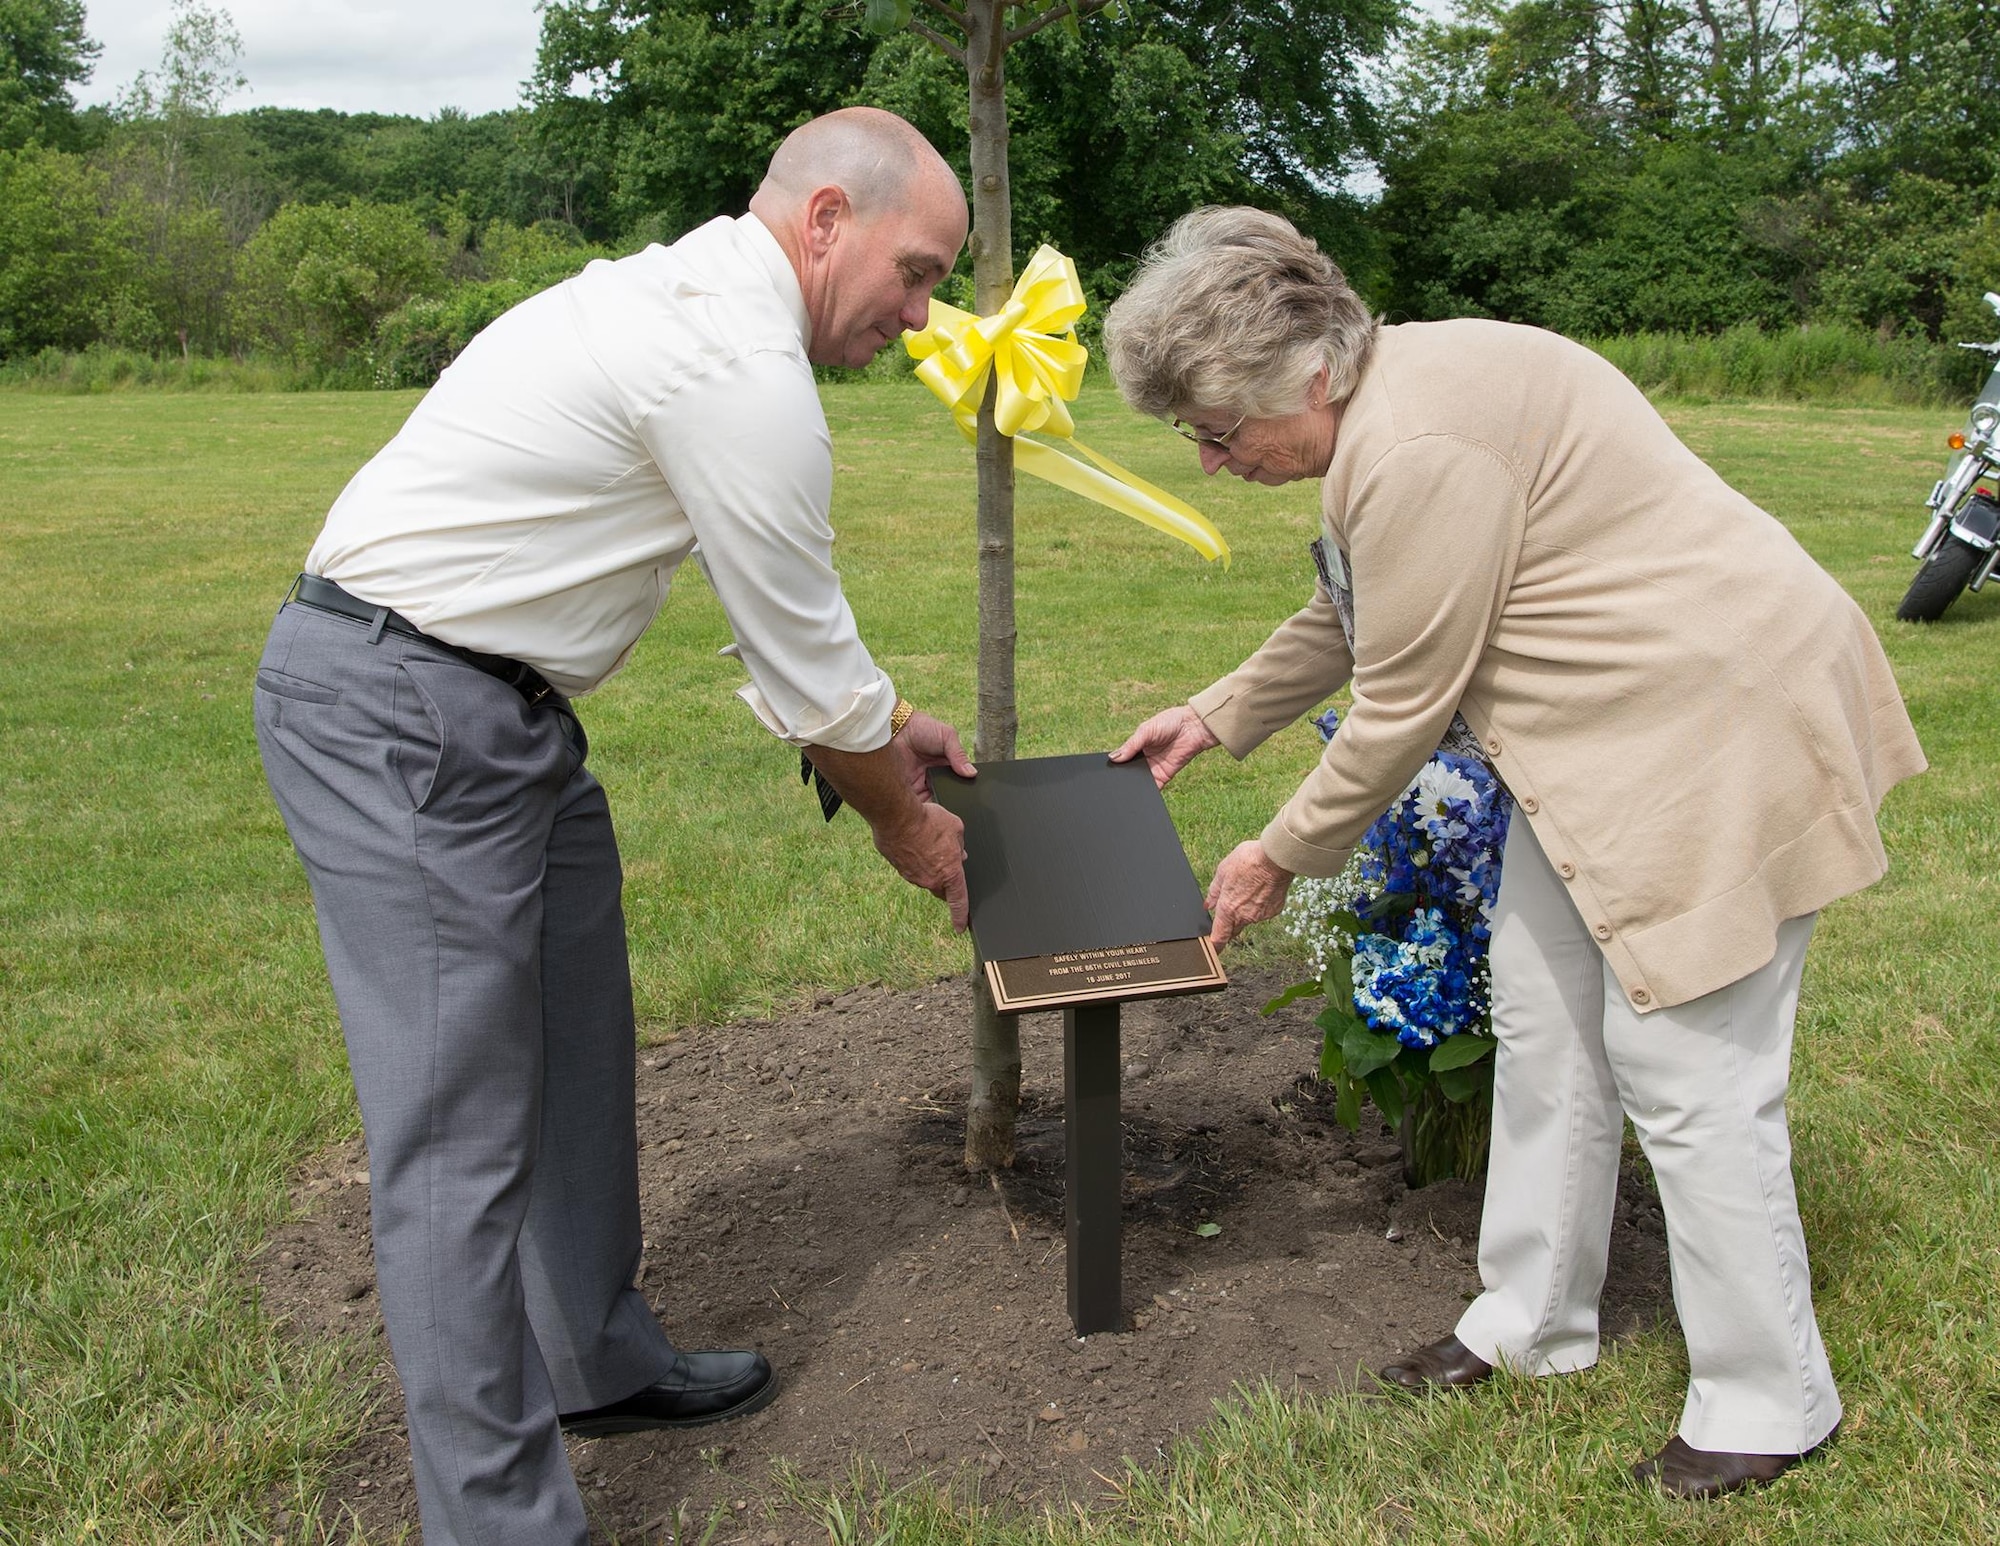 Jackie Guthrie unveils a plaque in memory of her late husband, Dennis “Dennie” Guthrie, with help from Steve Schofield, a member of the 66th Civil Engineering Division, during a Memorial Park Dedication Ceremony at Hanscom Air Force Base, Mass., June 16. Guthrie worked for the 66th Civil Engineering Division as a heating, ventilation and air conditioning technician. Also honored during the event were Dana E. Kirane and retired Tech. Sgt. John A. Raynes. (U.S. Air Force photo by Jerry Saslav)